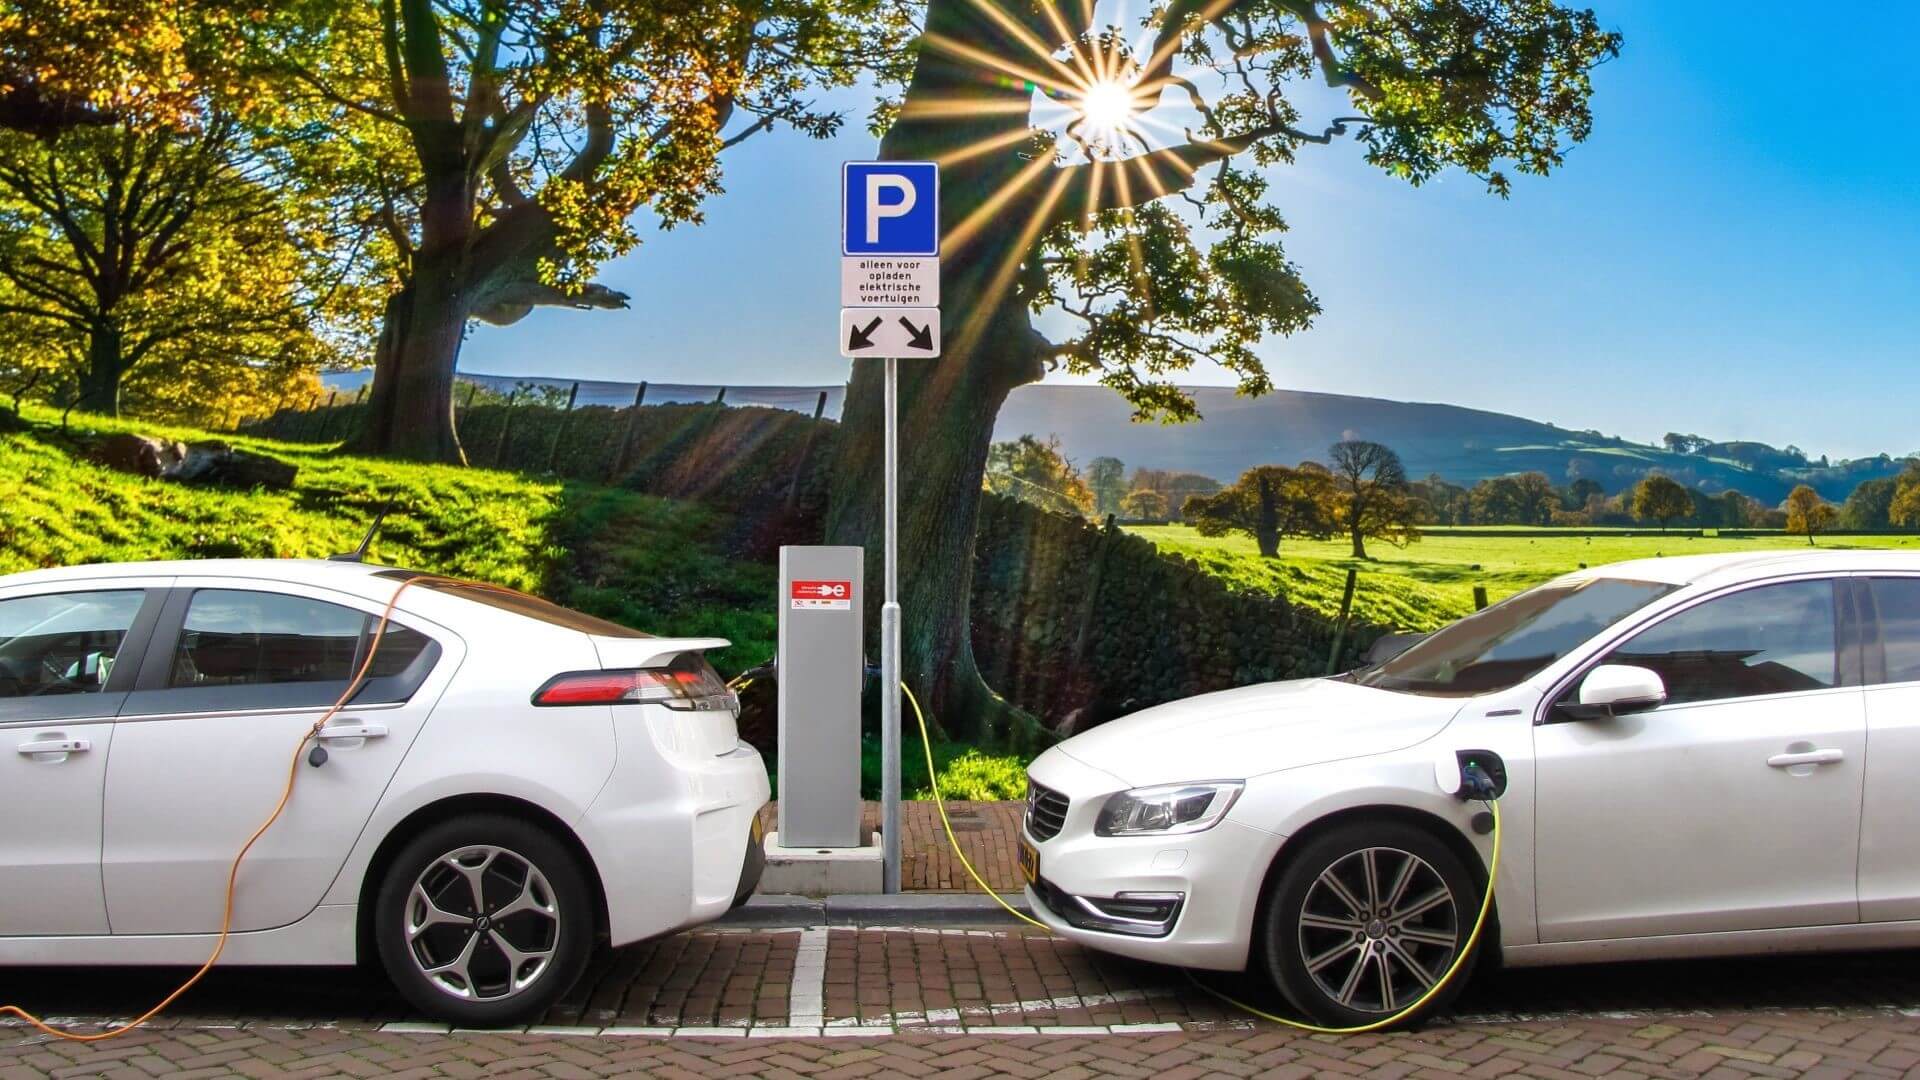 Two electric vehicles parked on at charging point